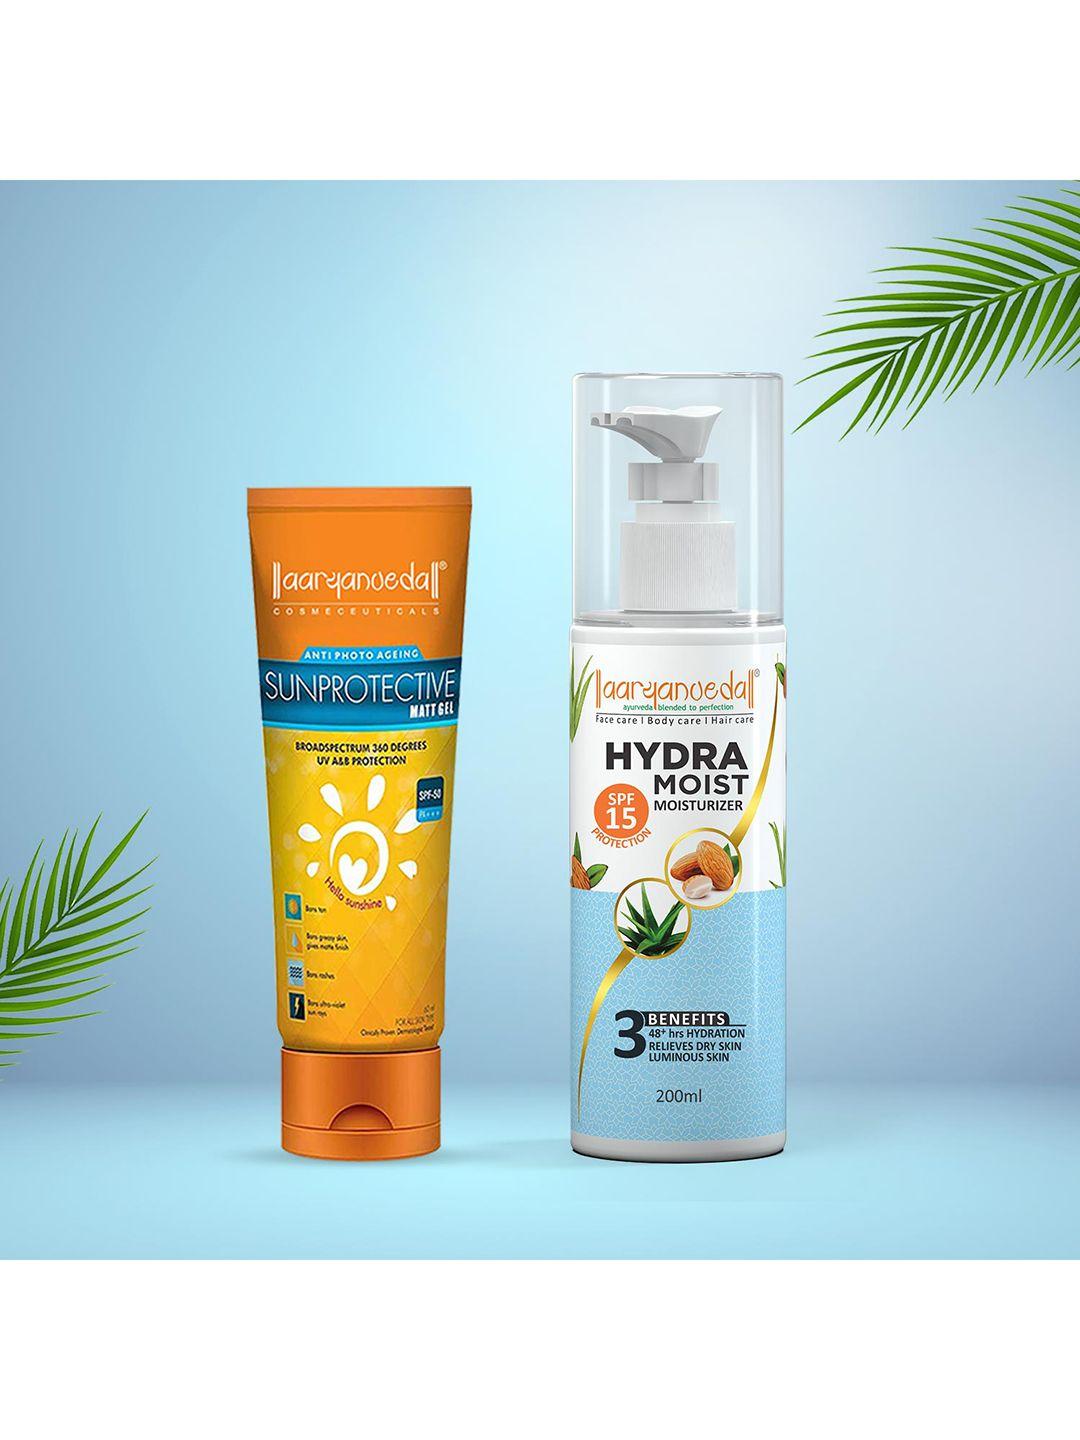 aryanveda-sunscreen-spf-50-pa+++-with-hydra-moisturizer-spf-15-for-sunprotective-260g